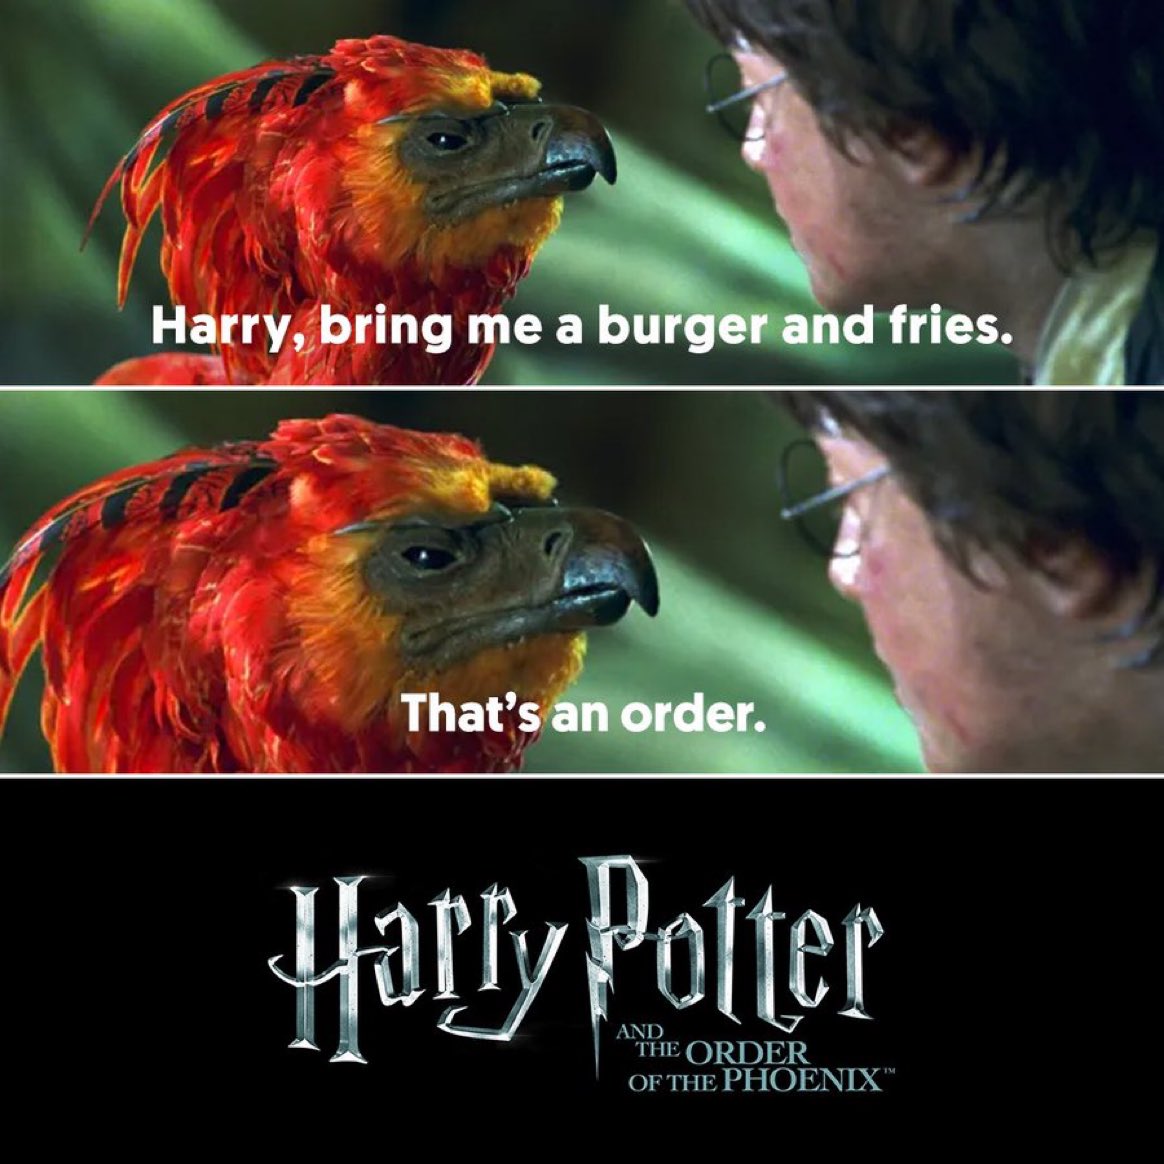 Harry Potter and the Order of the Phoenix 🤣